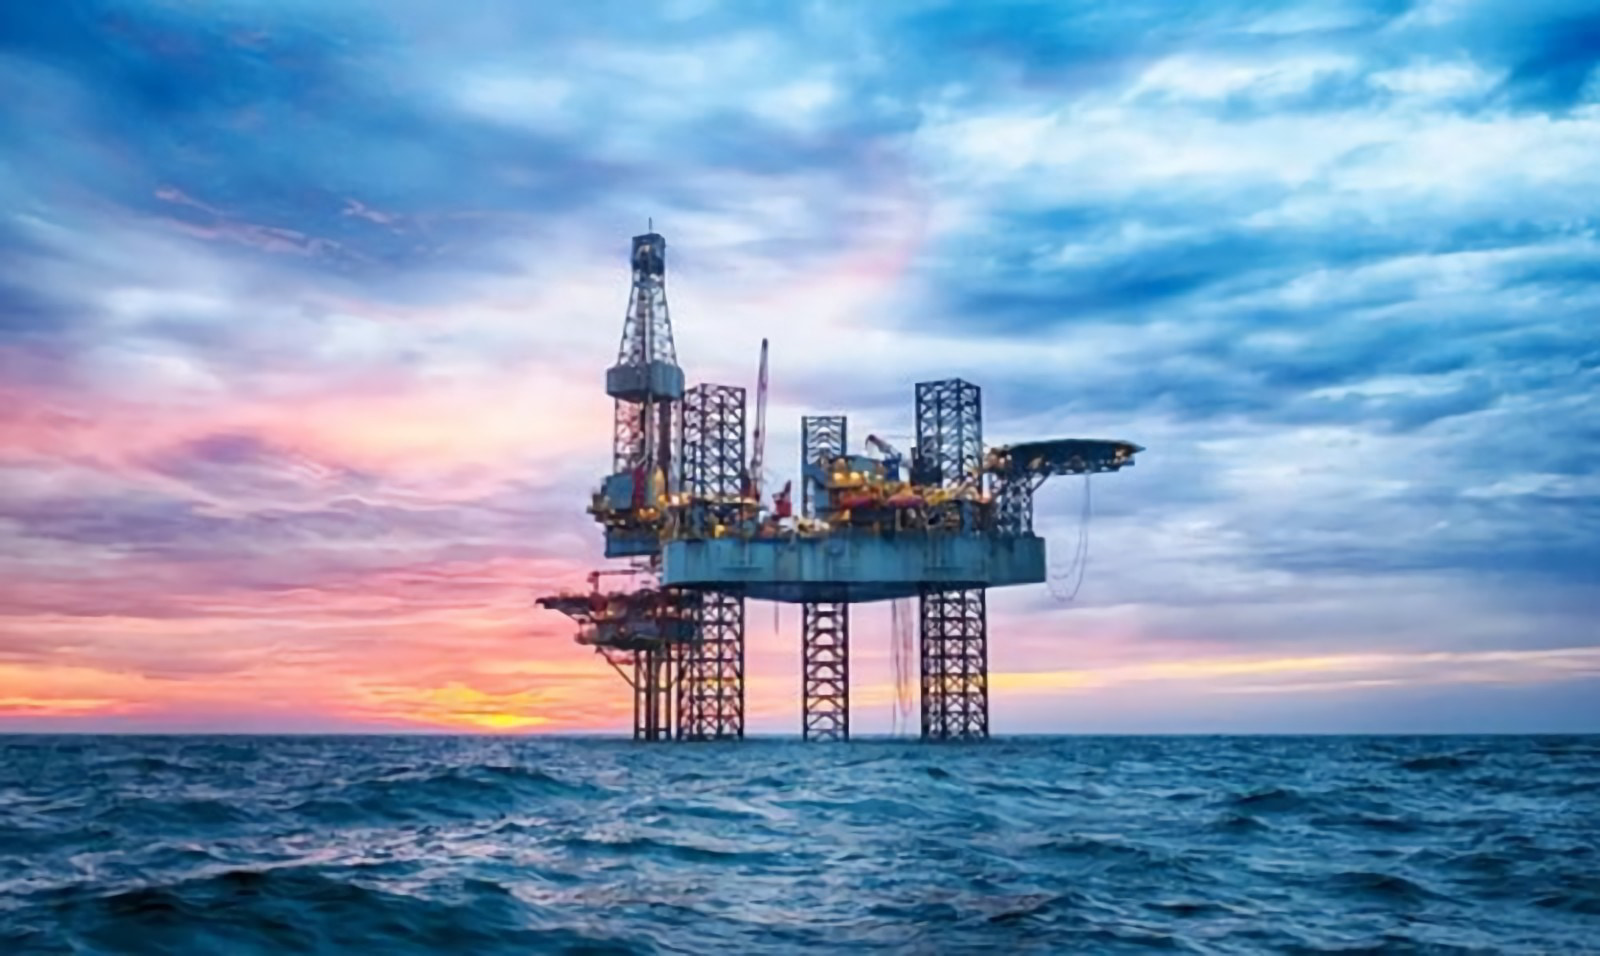 UK firm’s North Sea discovery forecasted to rake in 5 million in revenue over life of field